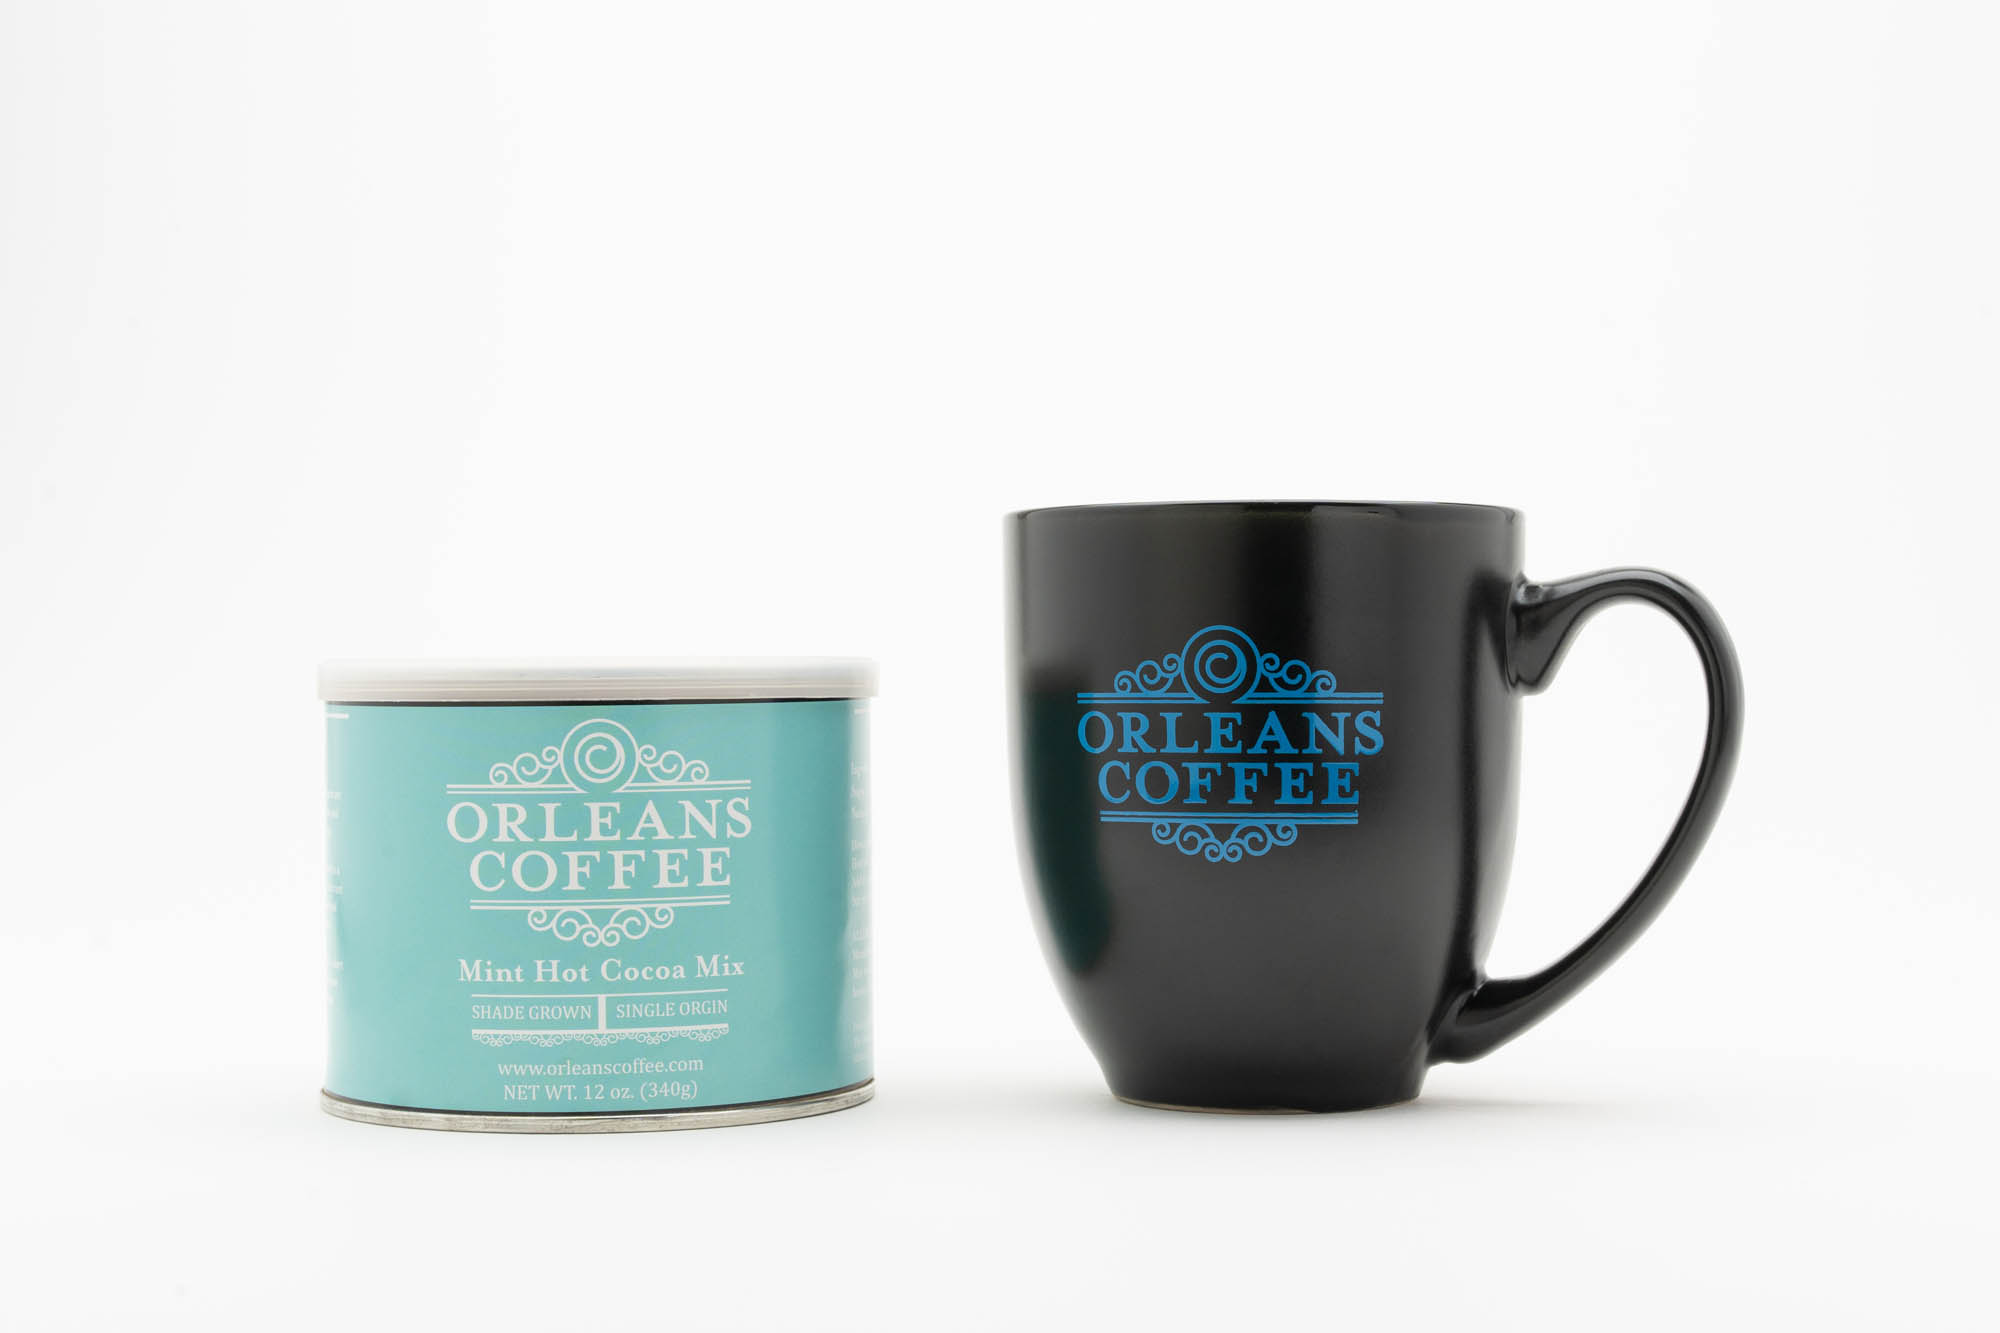 Orleans Coffee mug and Mint Hot Cocoa Mix product photos